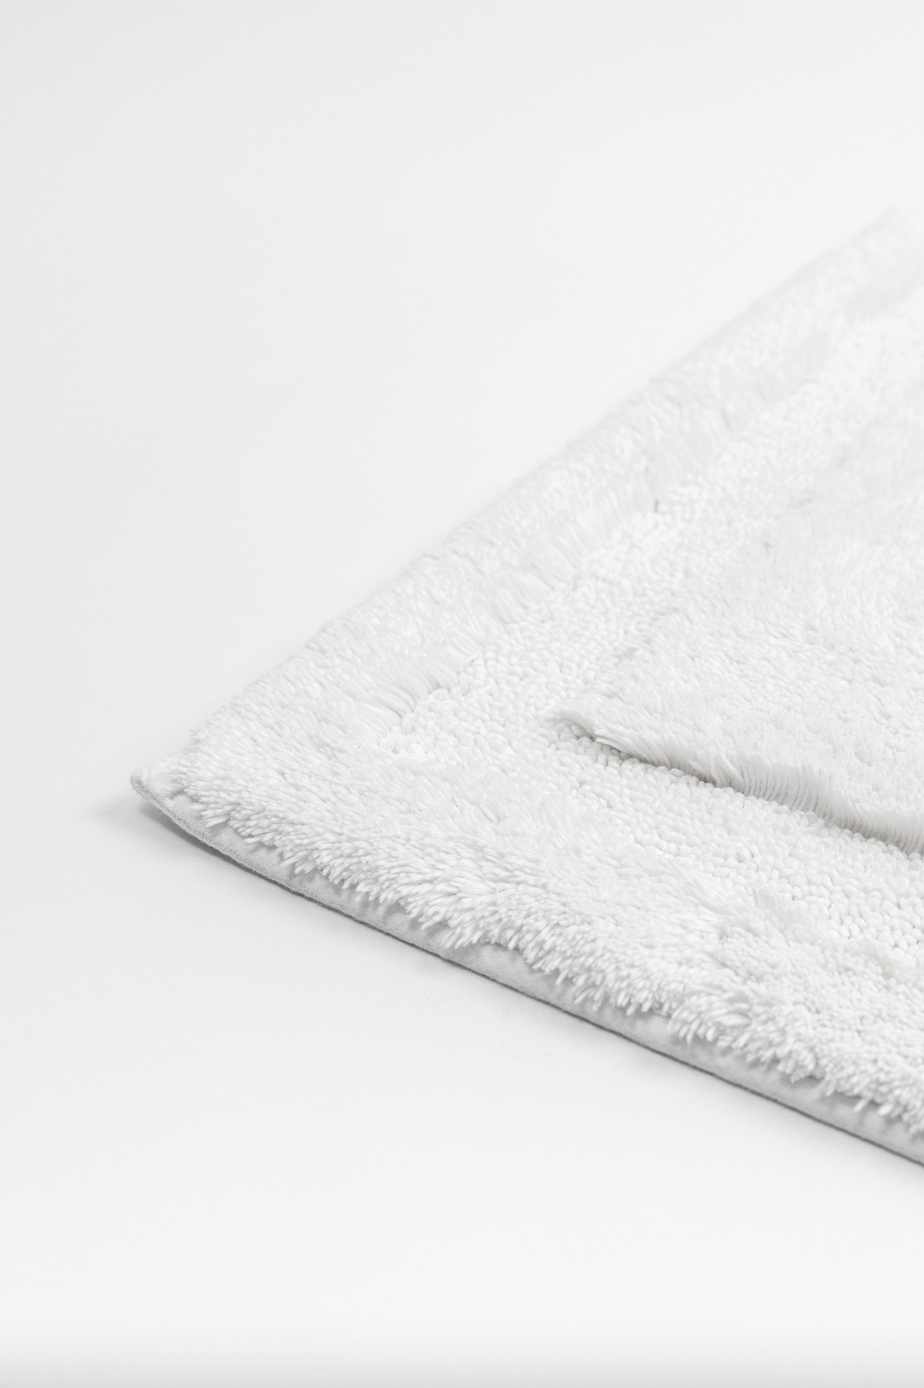 Need to Dry Your Bath Mats - Here's How! - Tru Earth